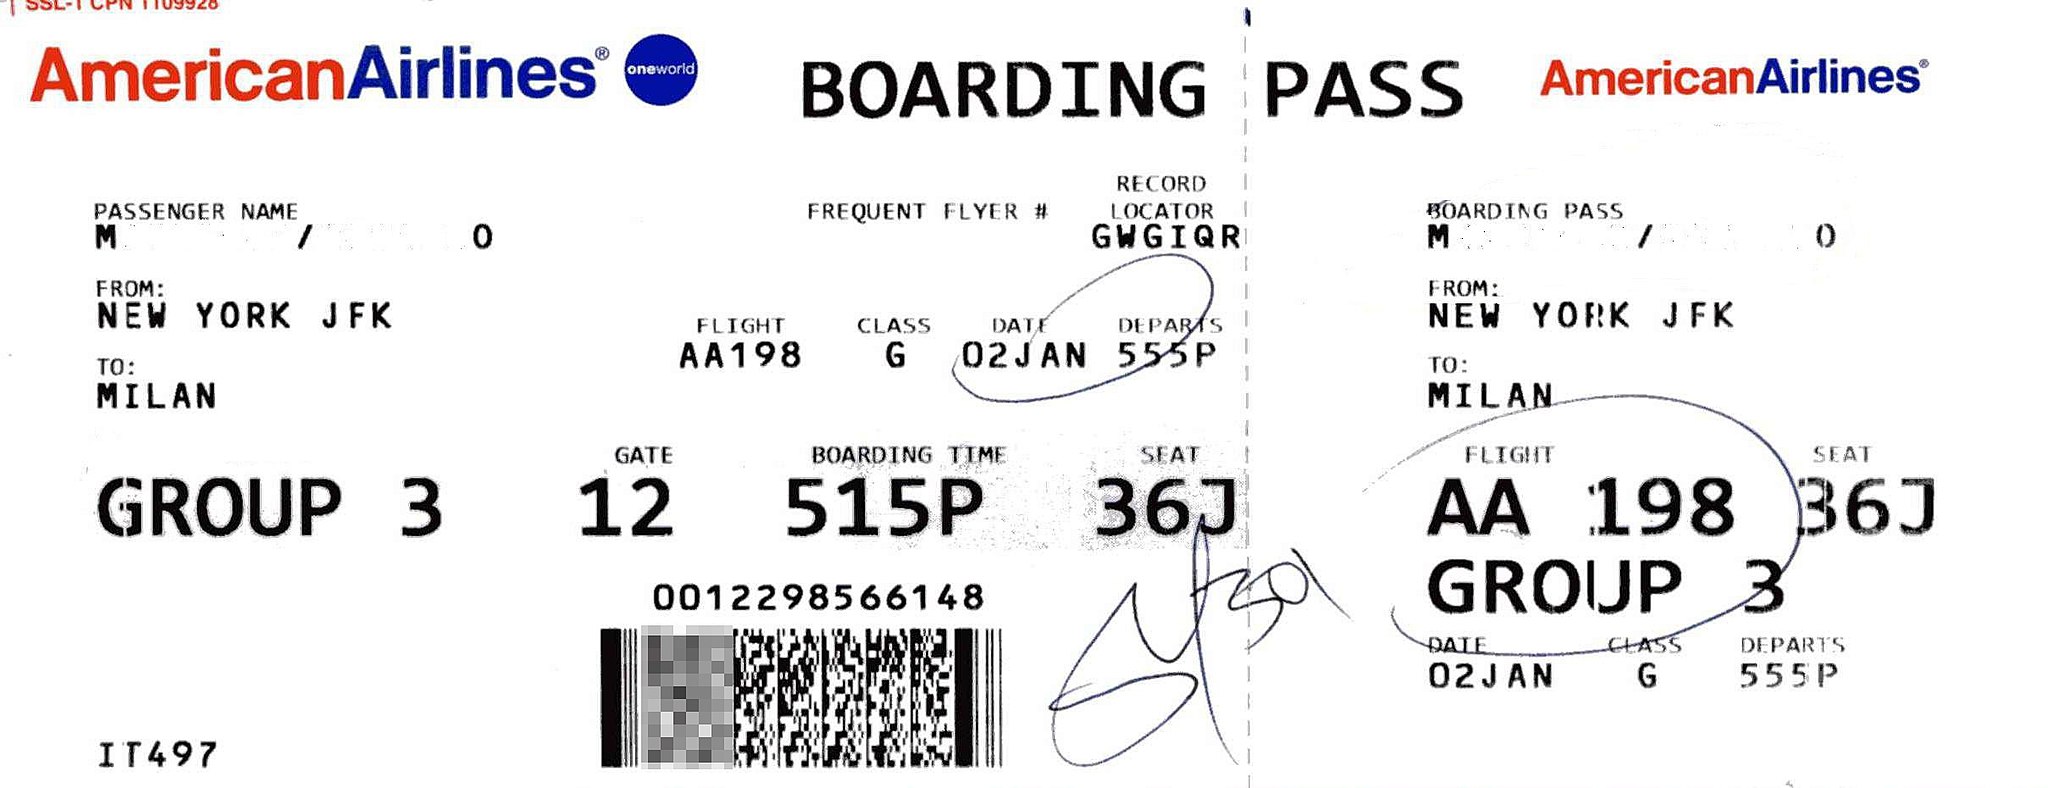 2048px-American_Airlines_boarding_pass_AA_198